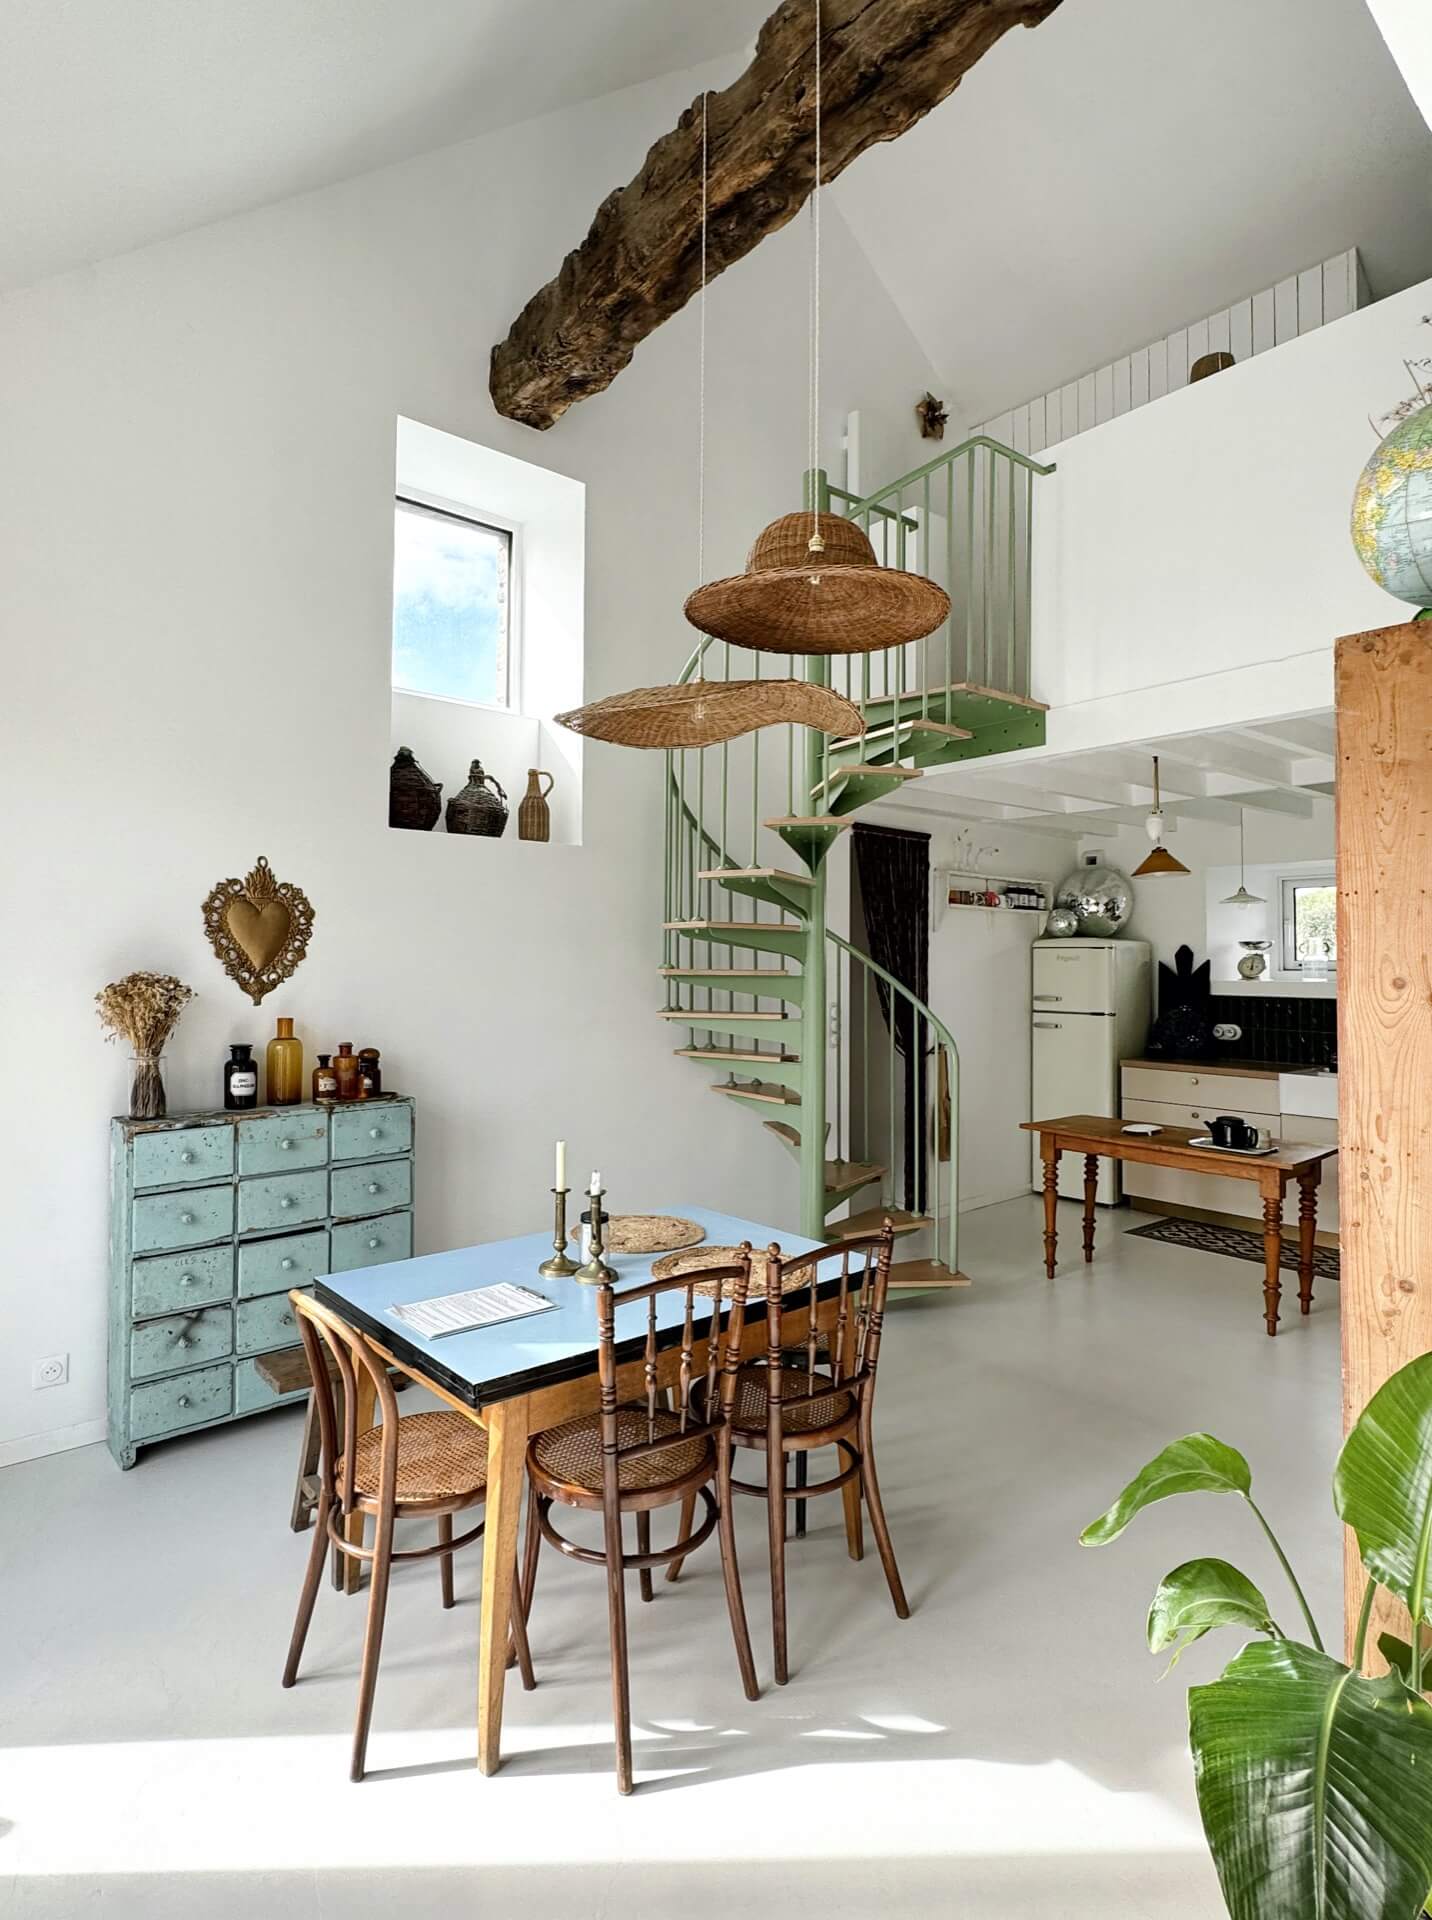 an open plan kitchen and dining area in an old French barn conversion, with a mint green spiral staircase and lots of vintage furniture and objects decorating the space. 